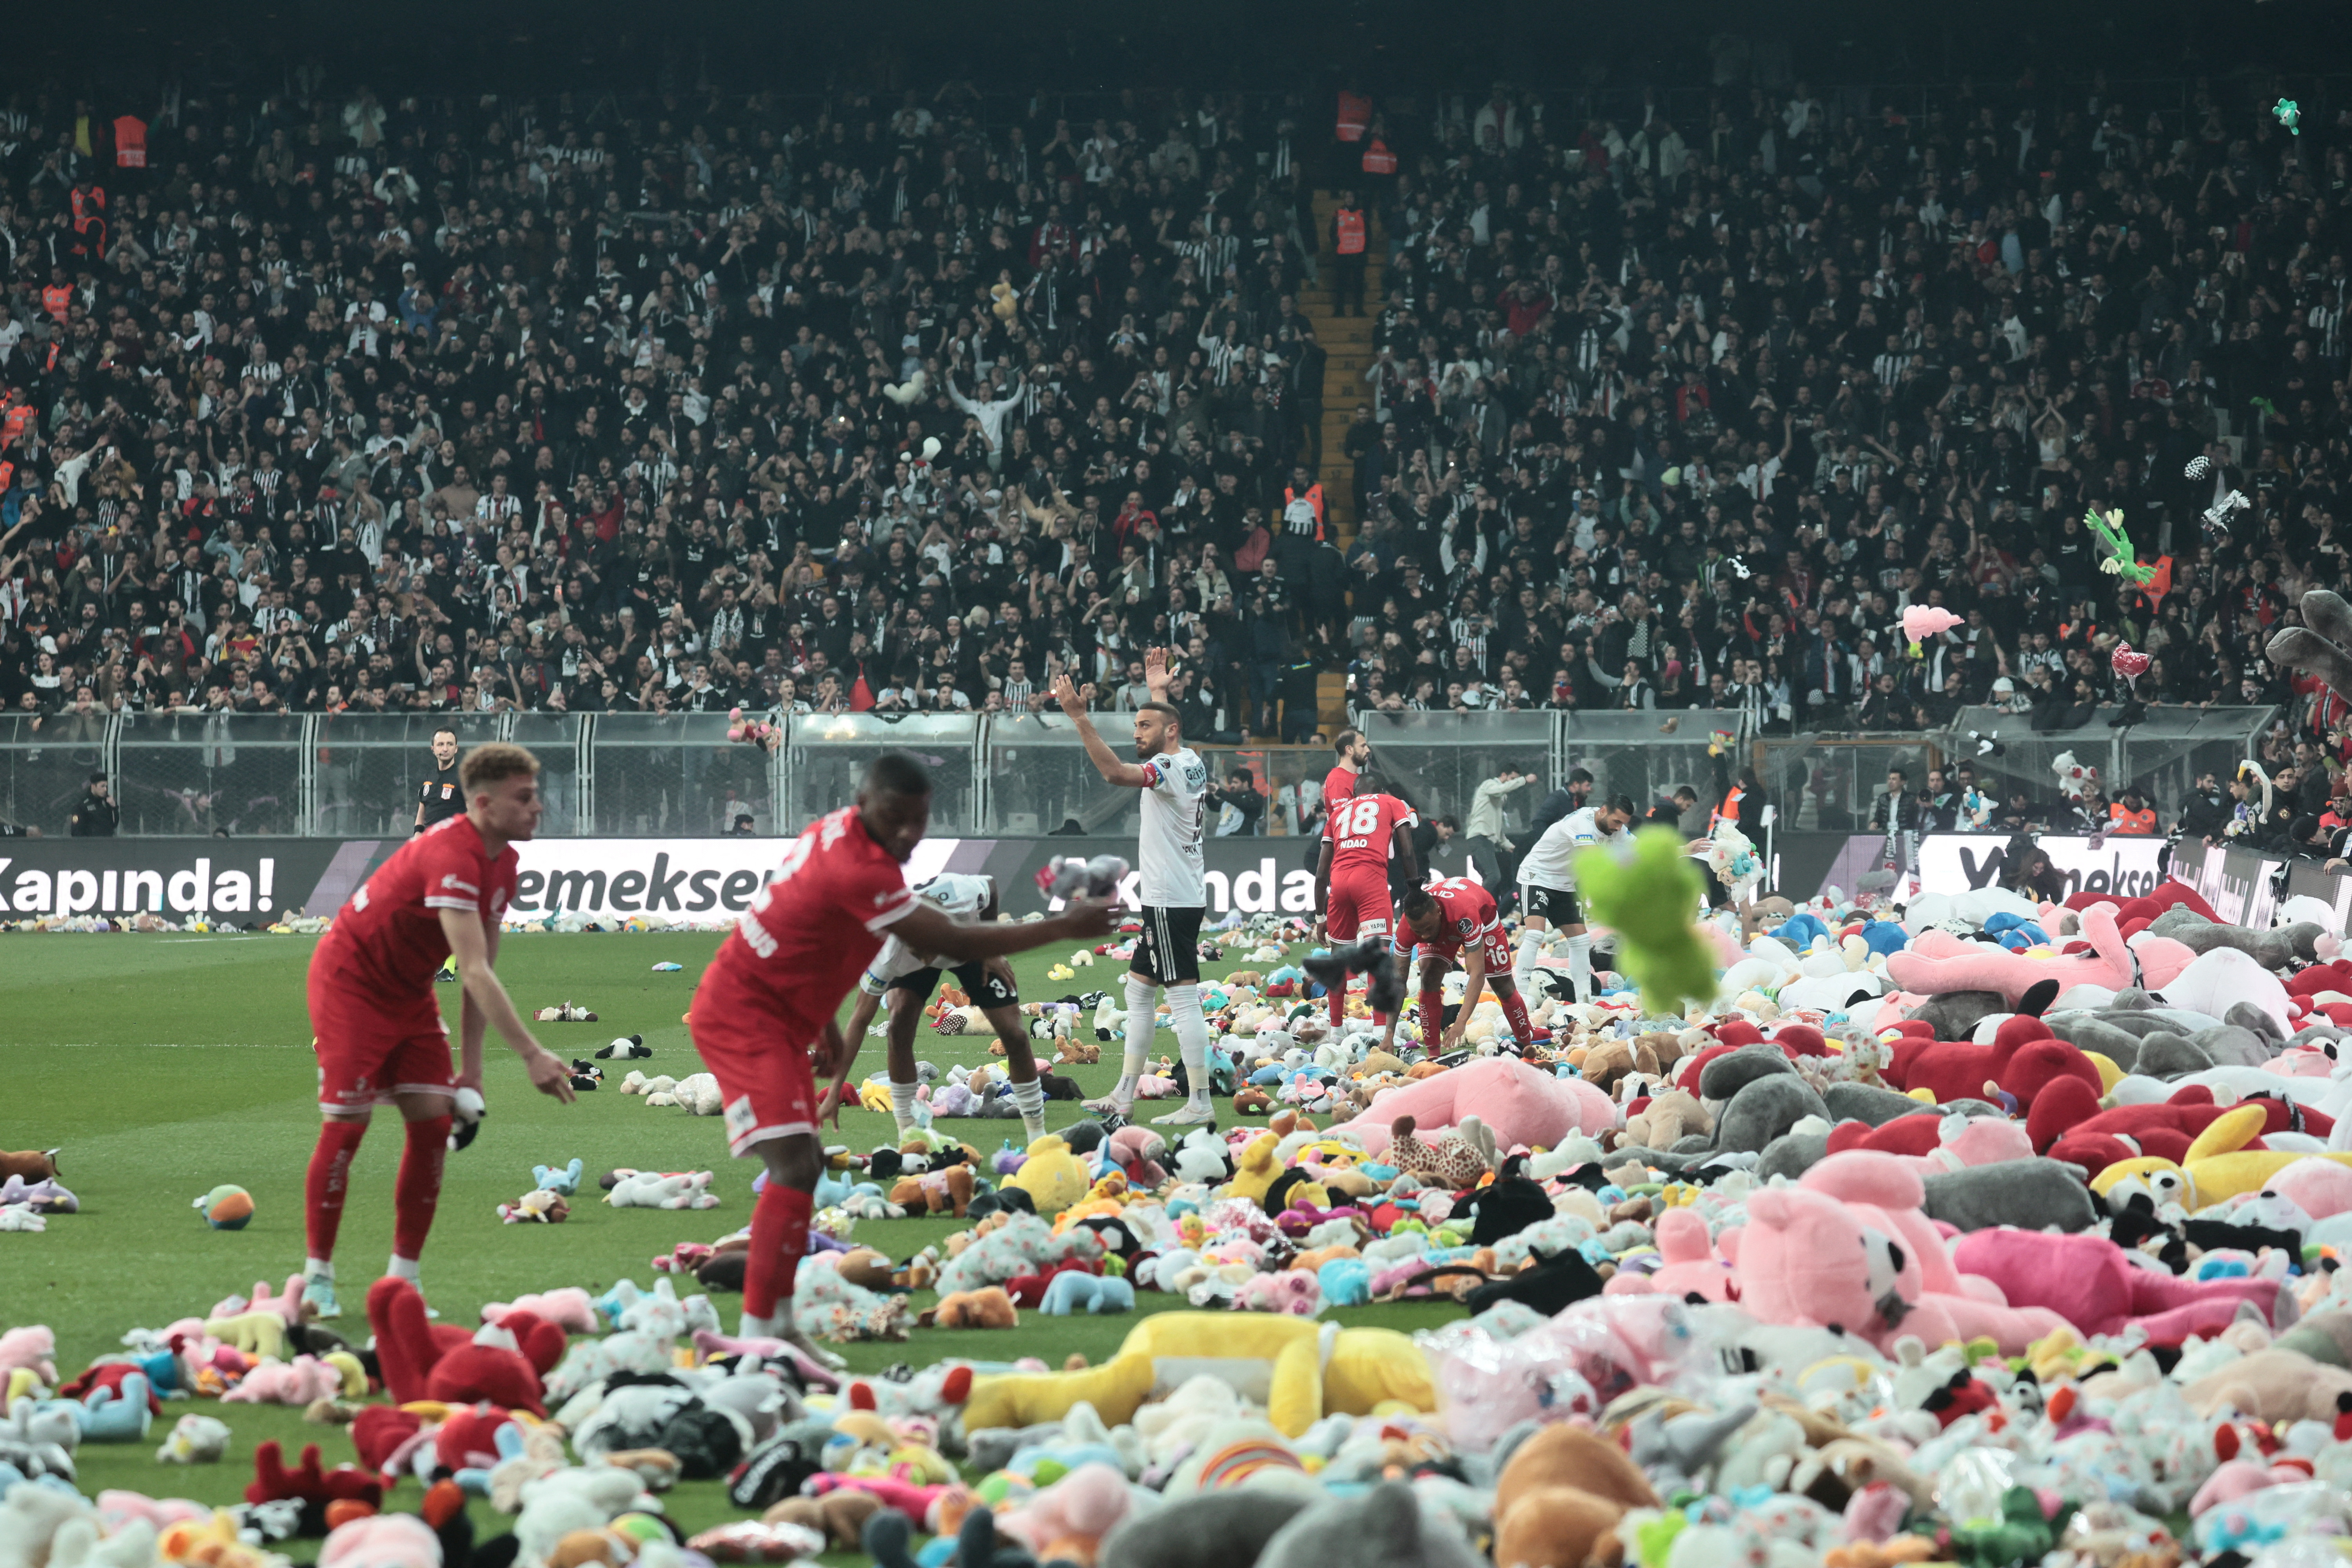 Besiktas vs Antalyaspor delayed as fans throw thousands of toys on pitch  for kids hit by earthquakes